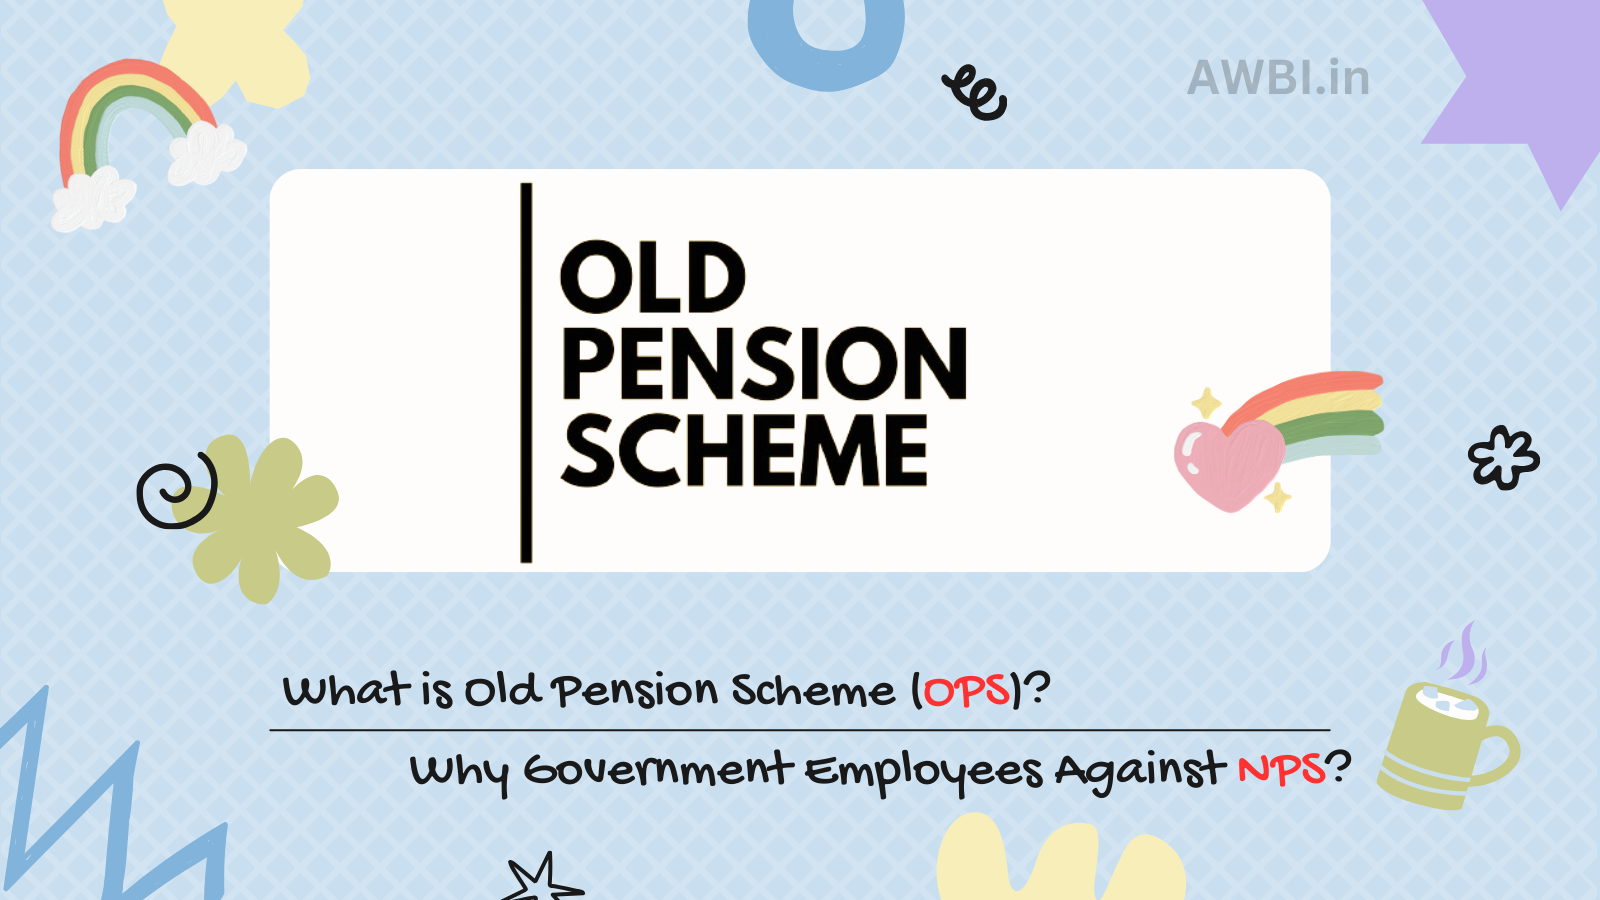 What is Old Pension Scheme? Why Government Employees Against NPS?